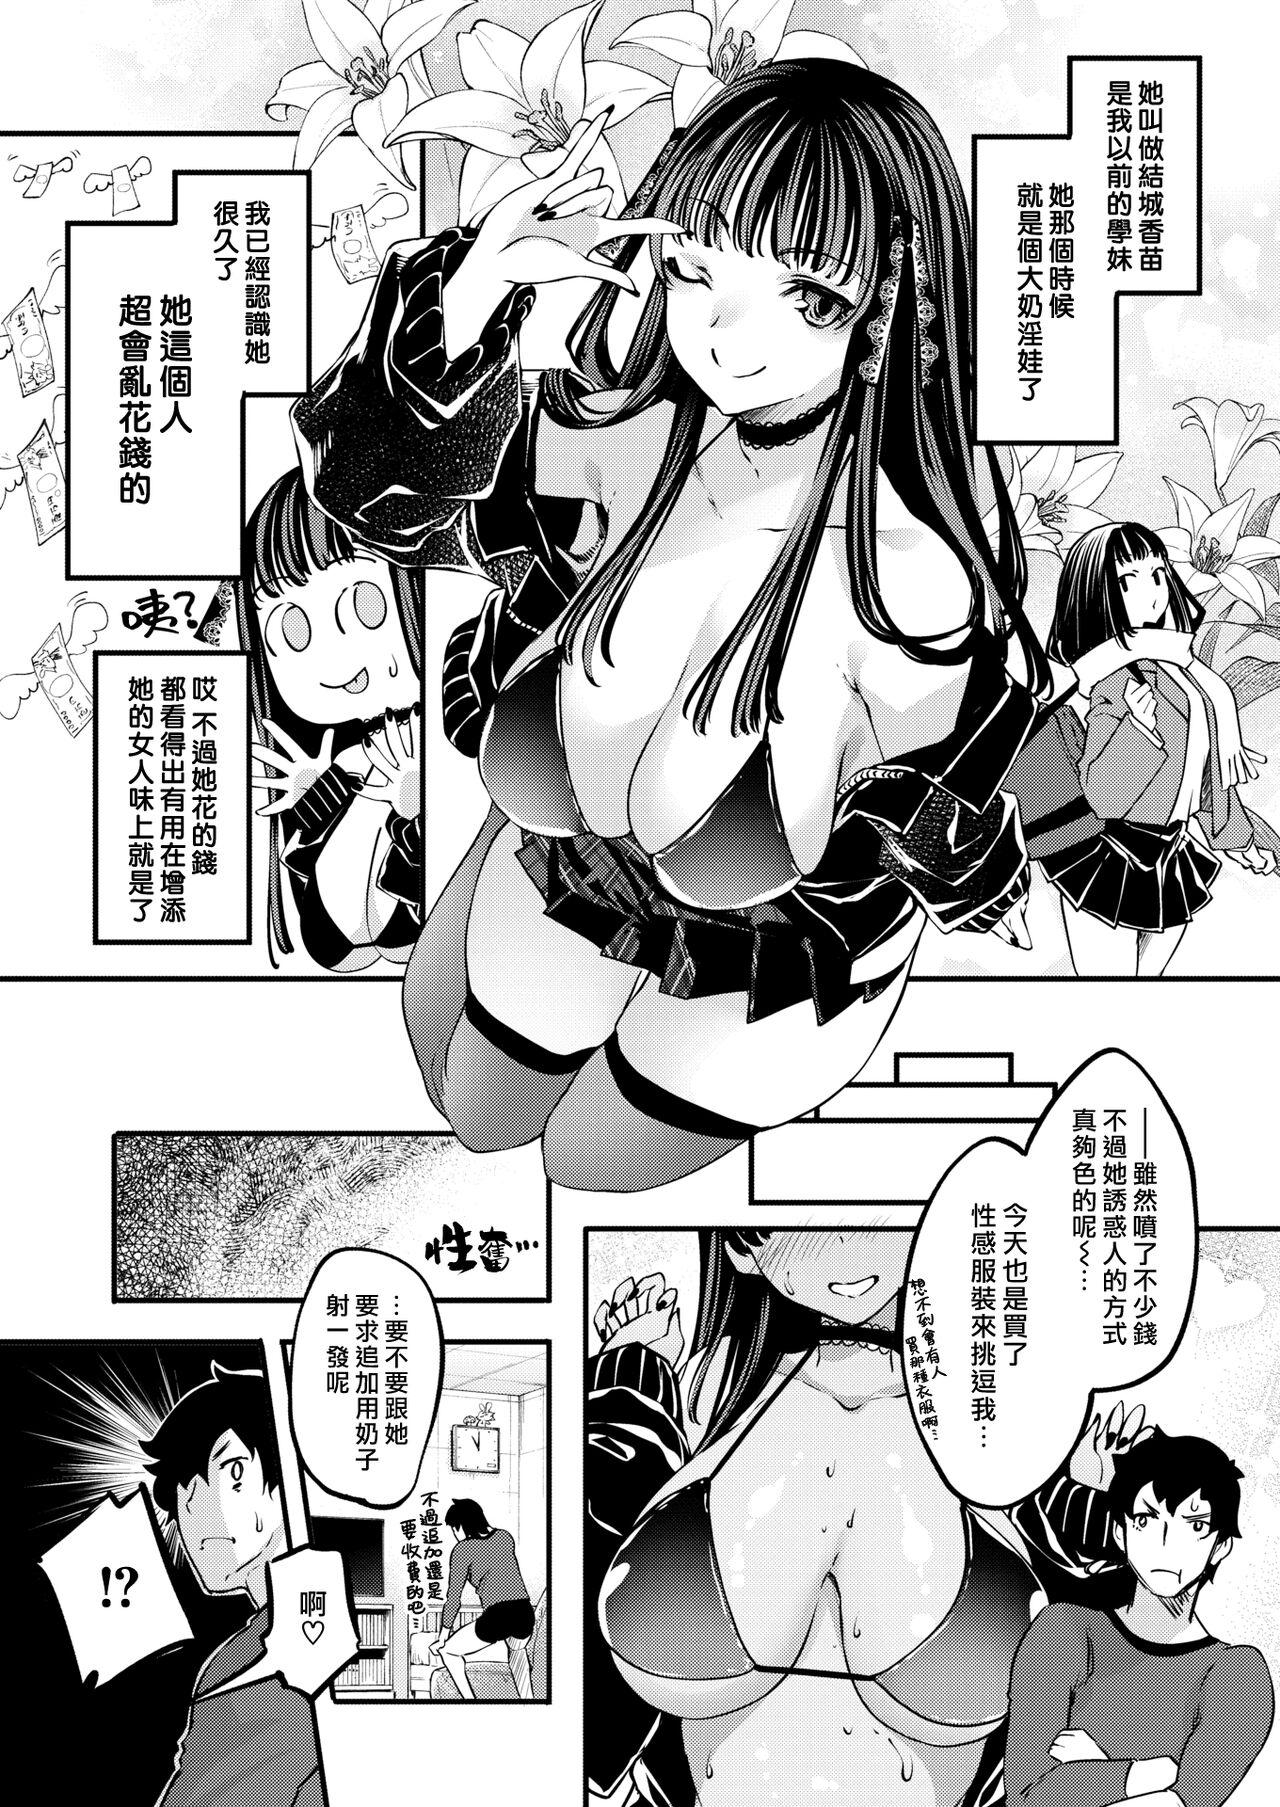 Whooty H Shitaino How much!! | 想色色的價碼!! Pounding - Page 7